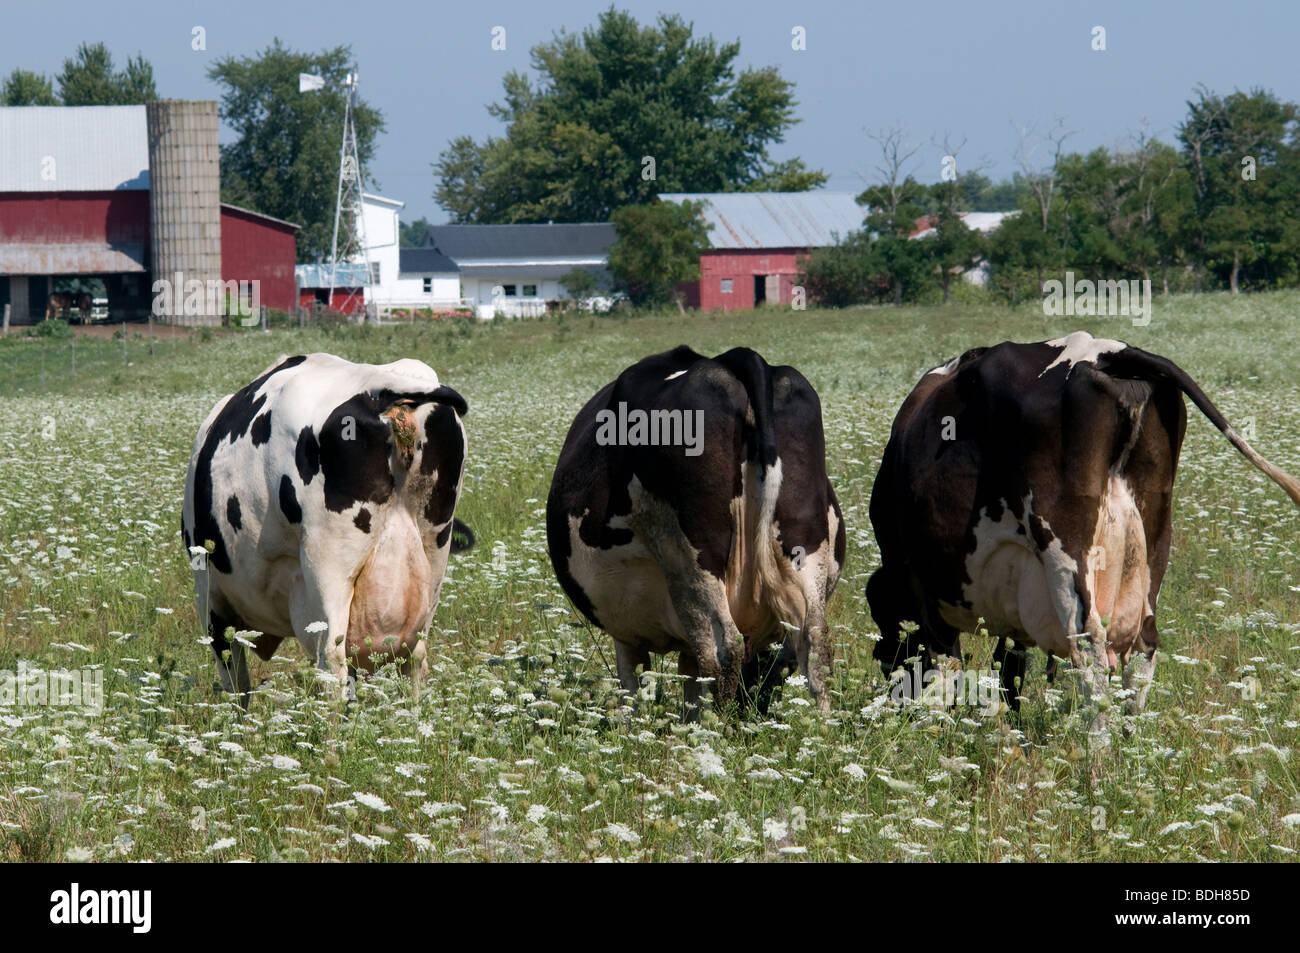 Holstein Dairy cattle grazing in filed of white Queen Ann's lace wildflowers.  Ohio USA Stock Photo